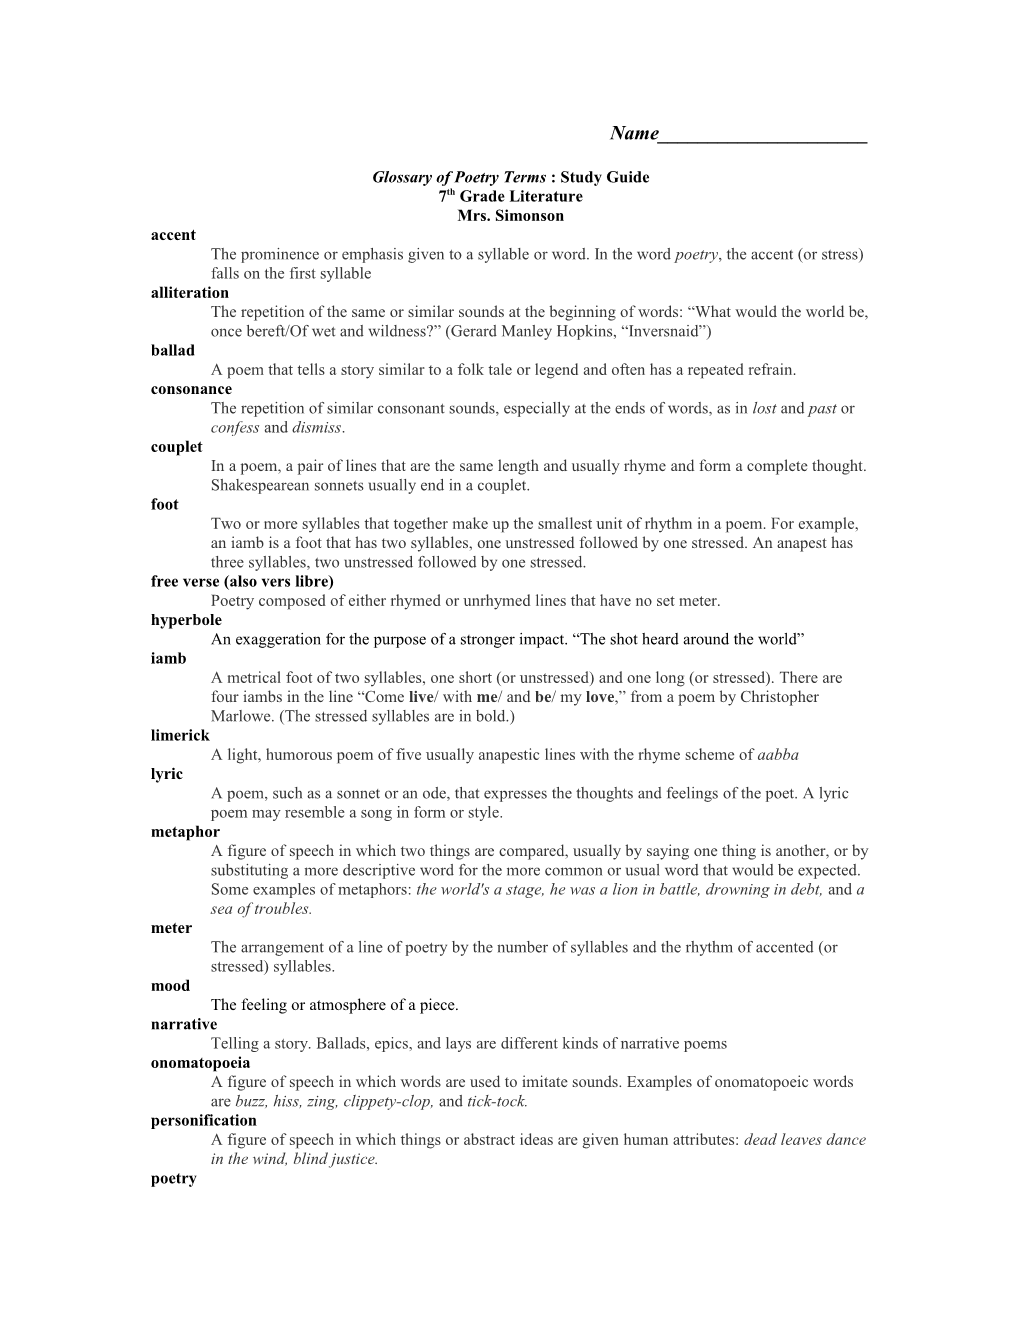 Glossary of Poetry Terms : Study Guide